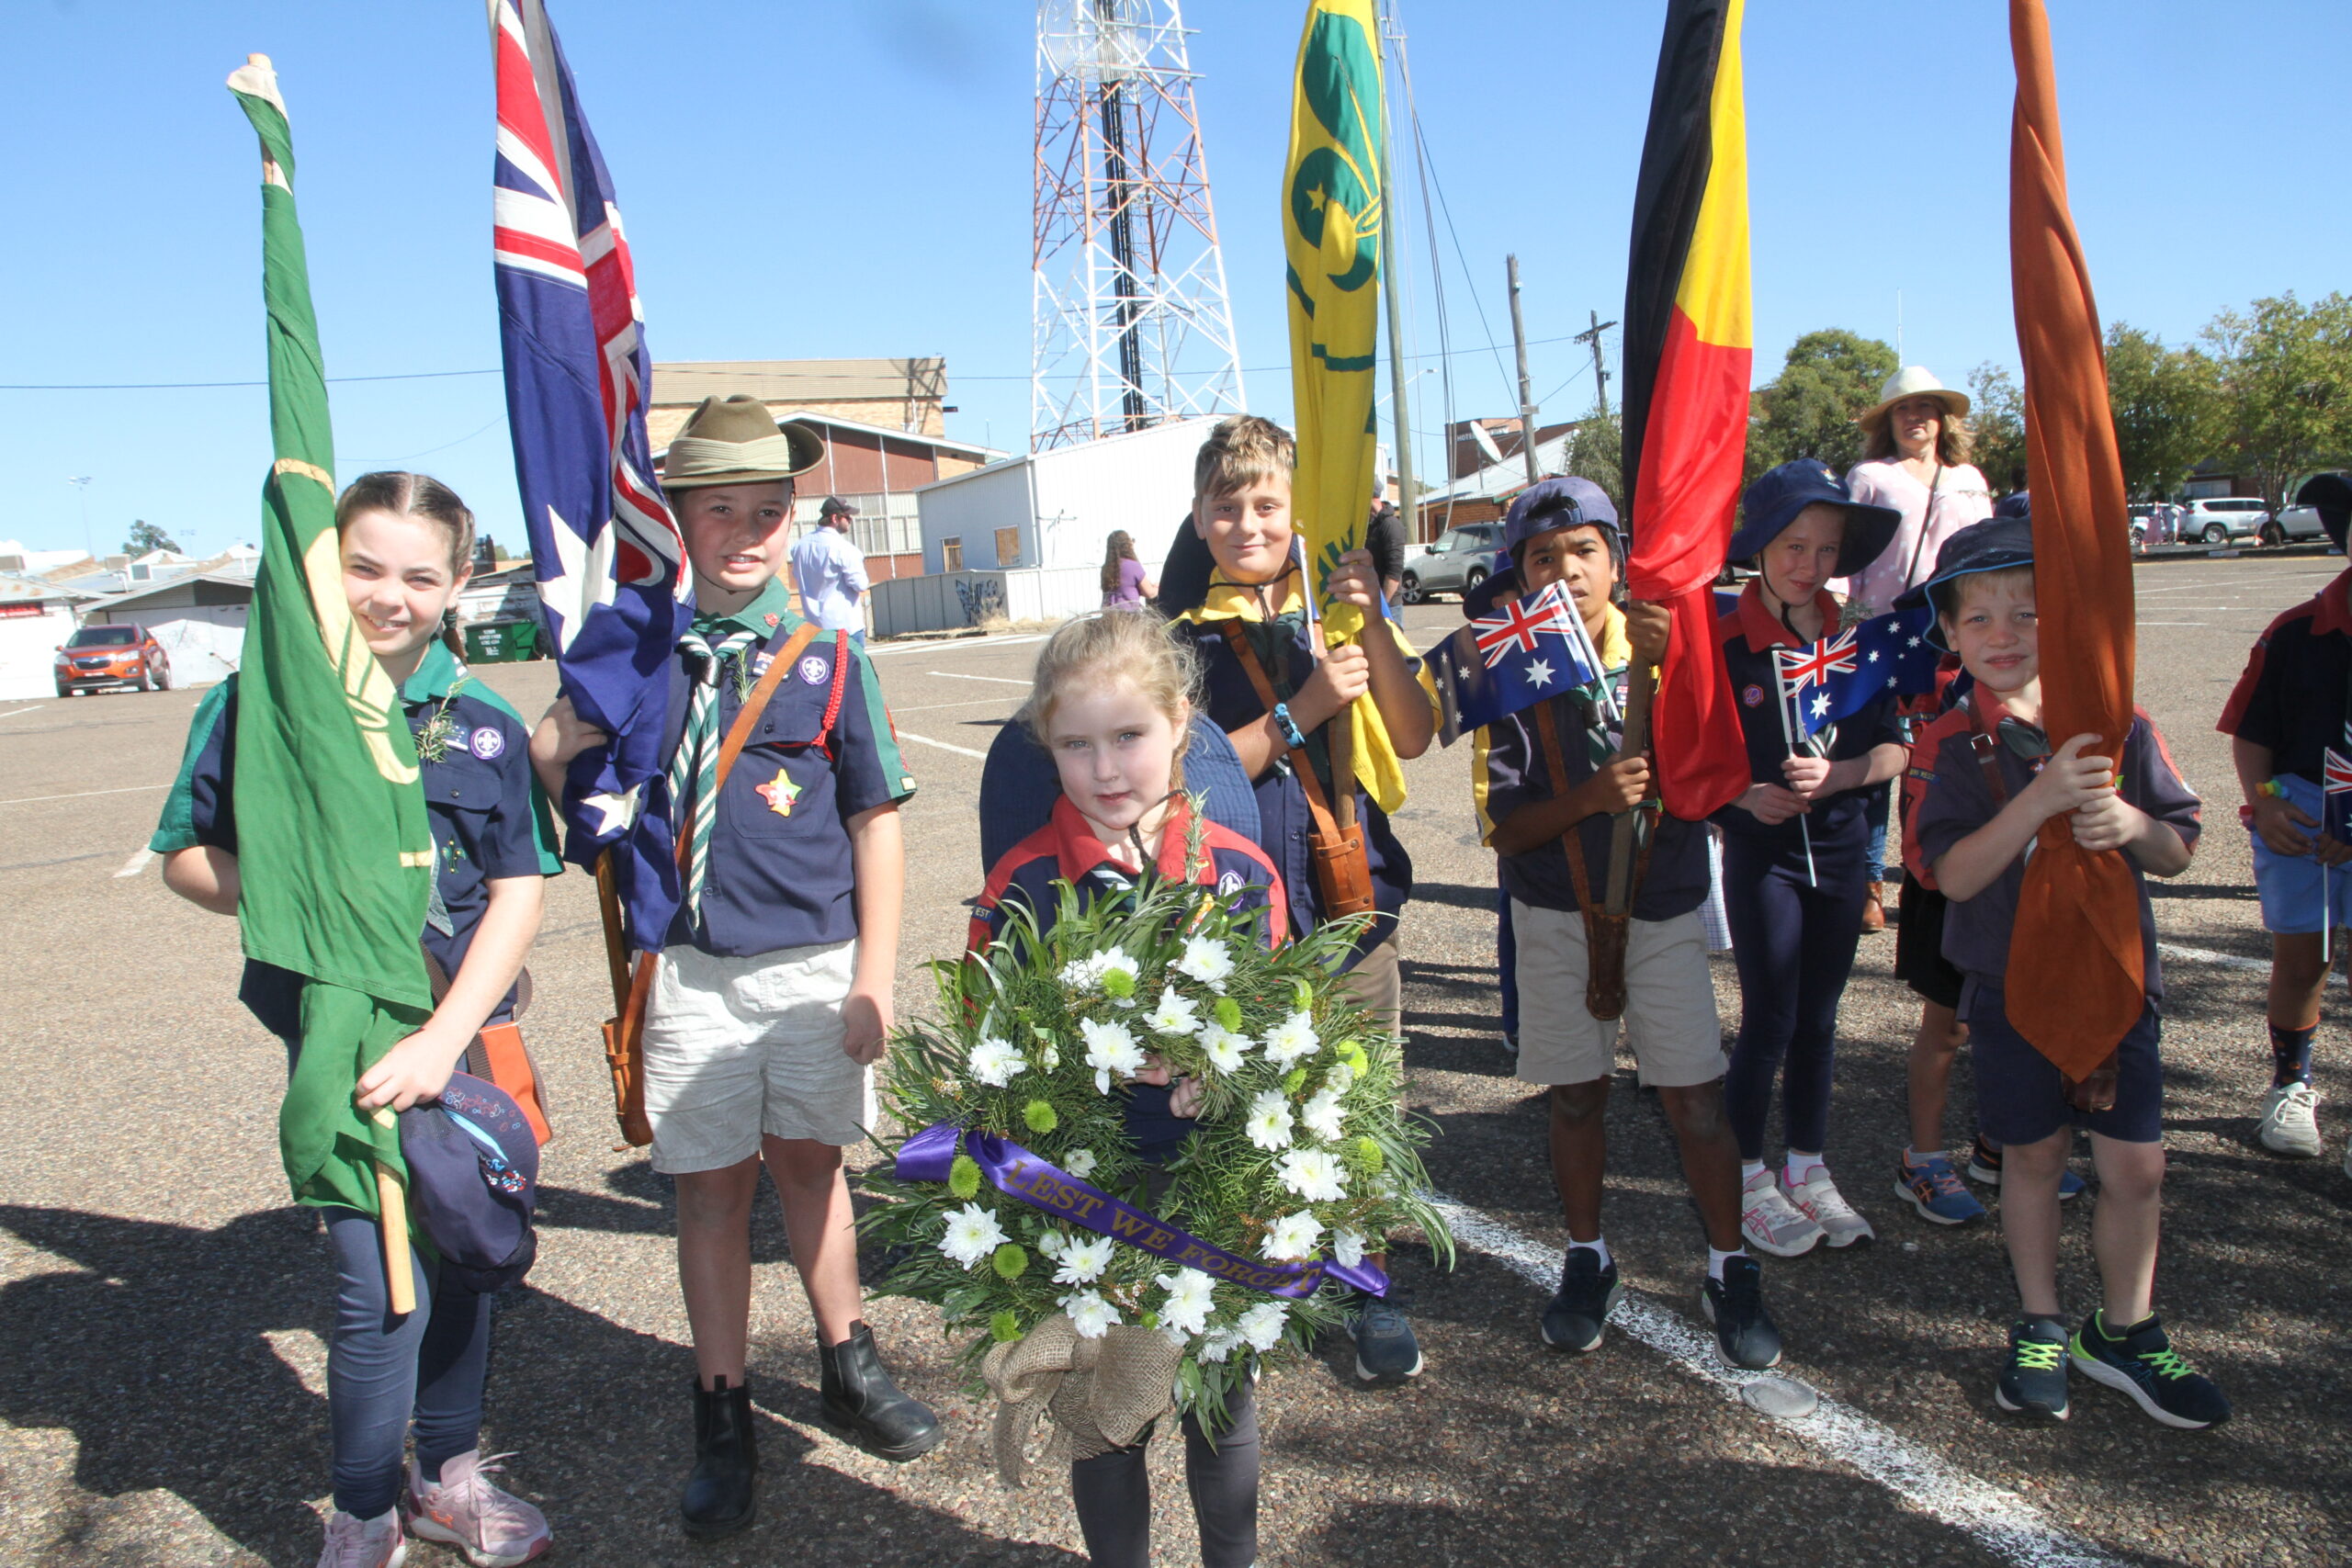 The Scouts - back, Millie Crossing, Ethan Harris, Jordan Dunn, Michael Clayton-Harris, Lillian Davies, Harry Crossing, Harry Dunne (obscured), Lachlan Dunn, and front with wreath, Rosie Davies,